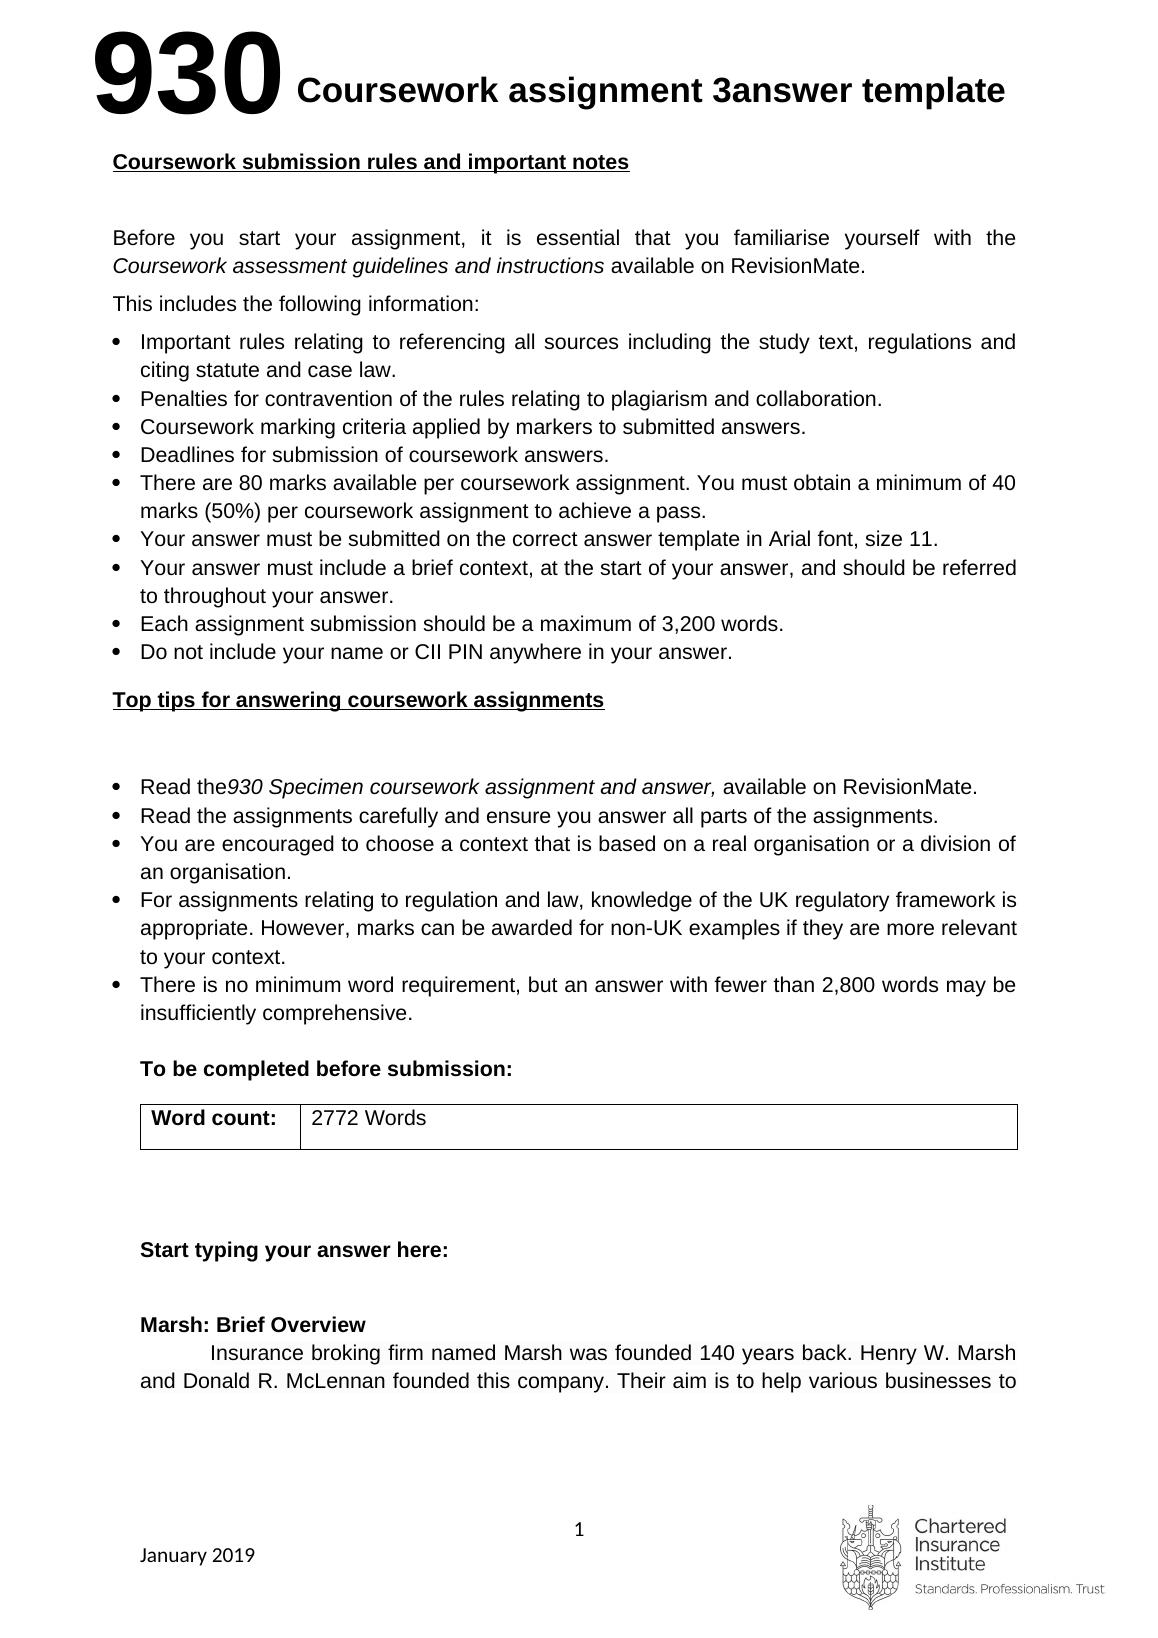 Coursework Assignment Template_1